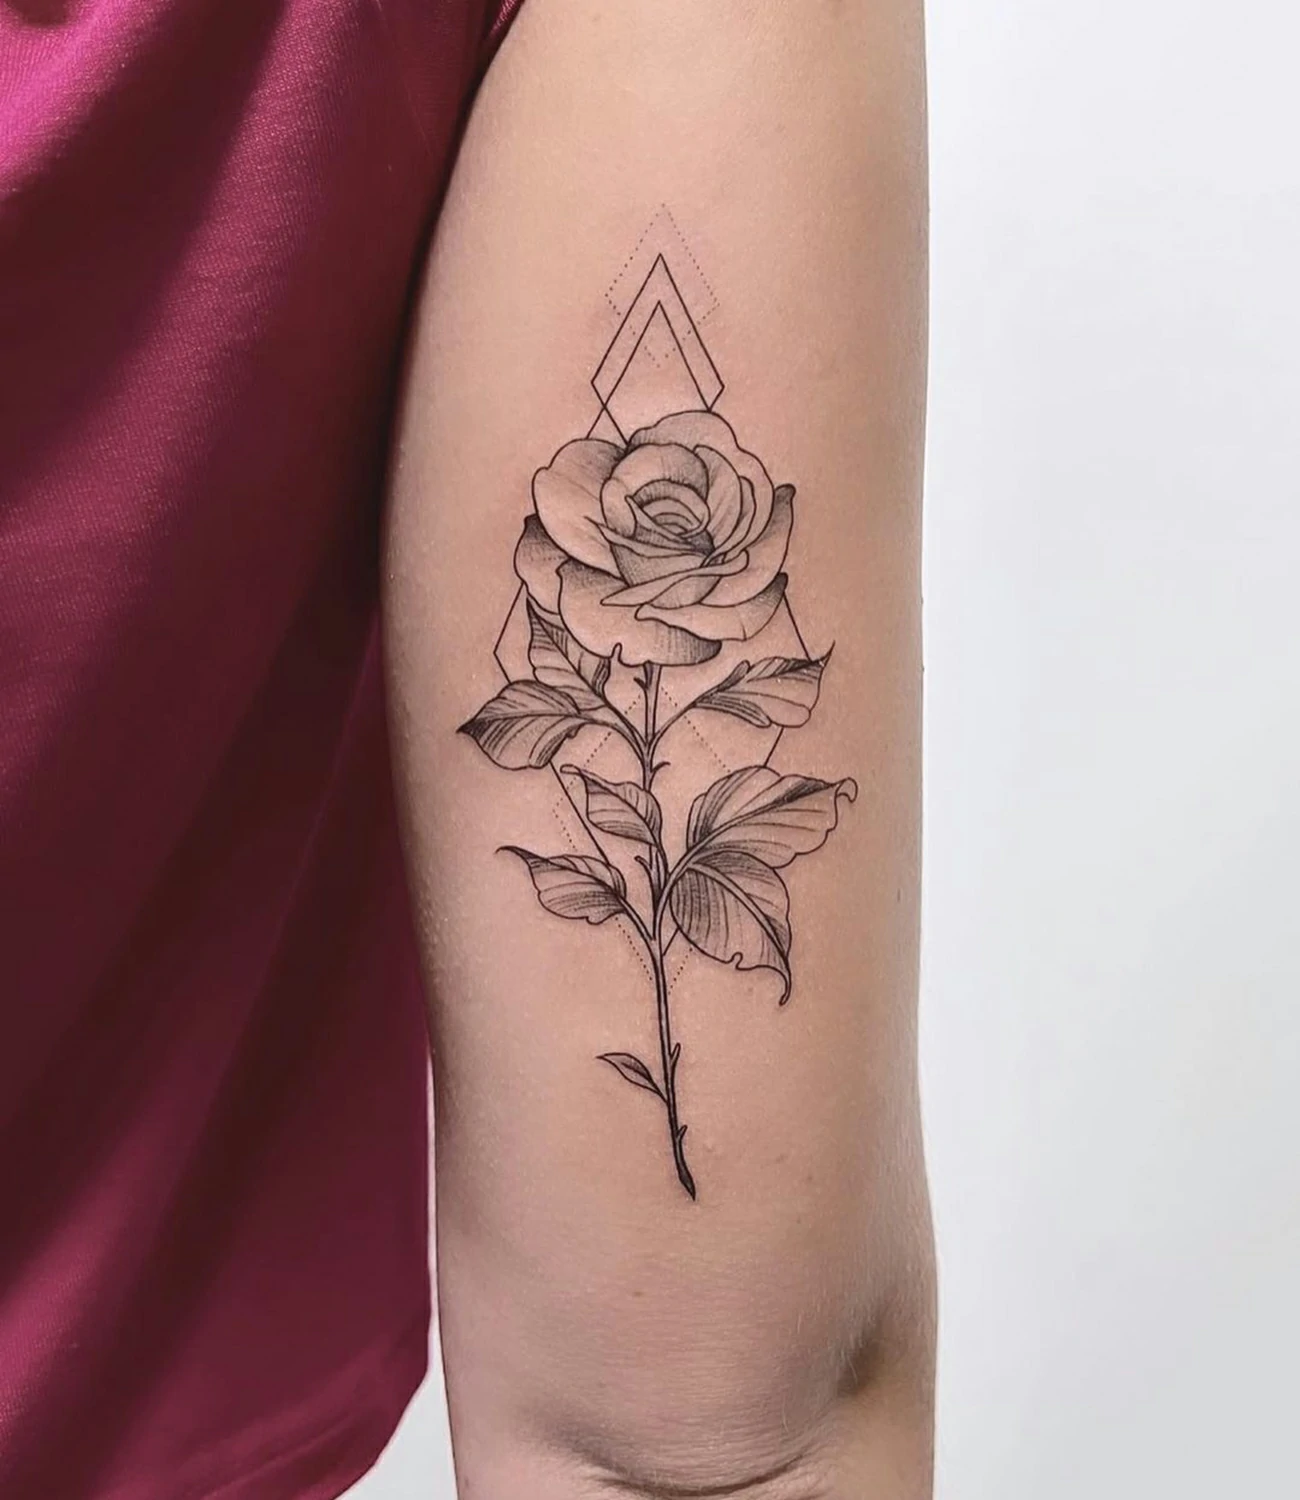 Geometric Rose Tattoo: Geometric rose tattoos combine the beauty of a rose with geometric shapes, symbolizing love and the harmony of nature.